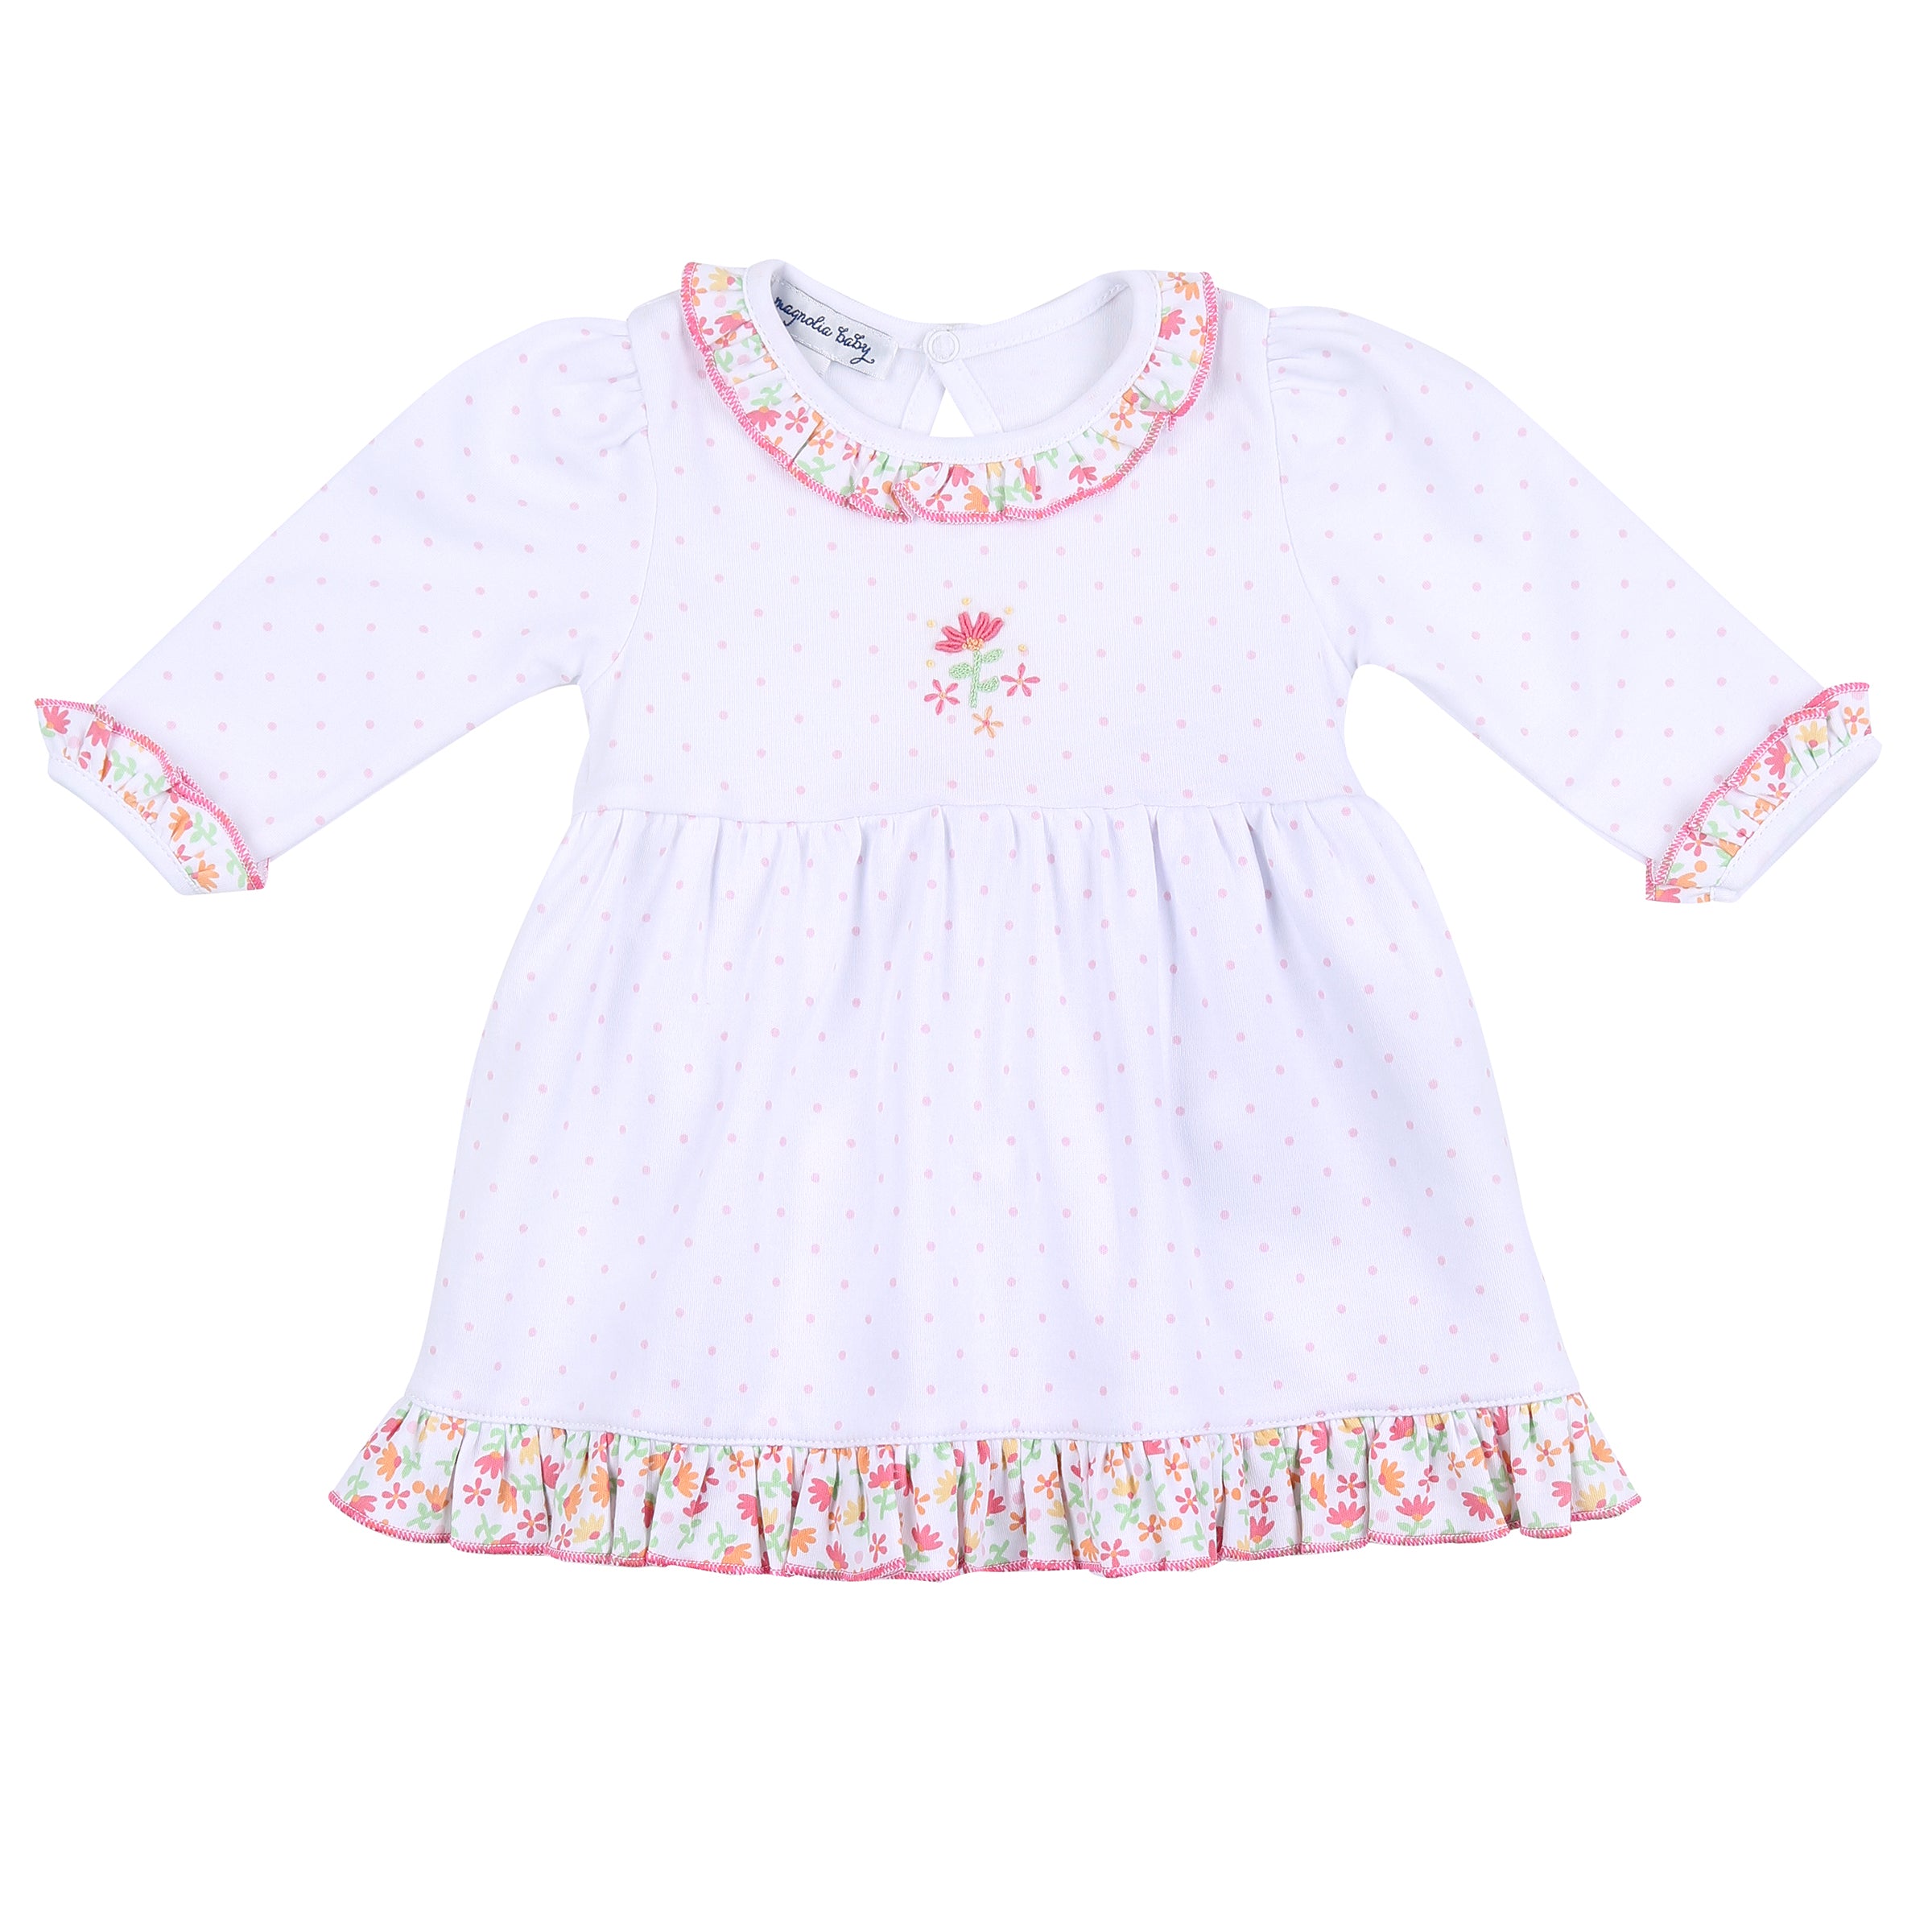 Autumn's Classics Embroidered Toddler Dress